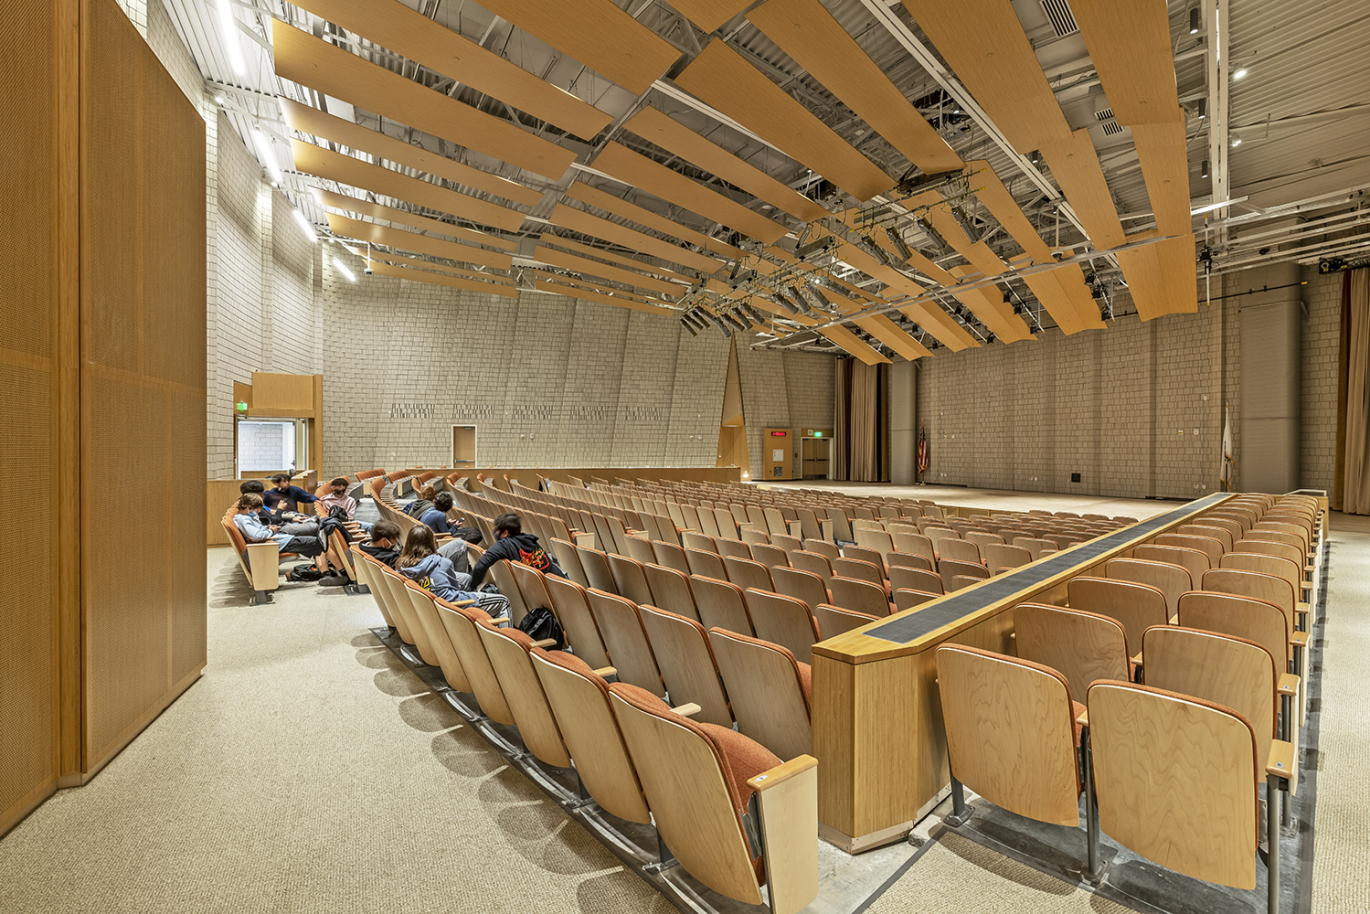 An auditorium for school and community